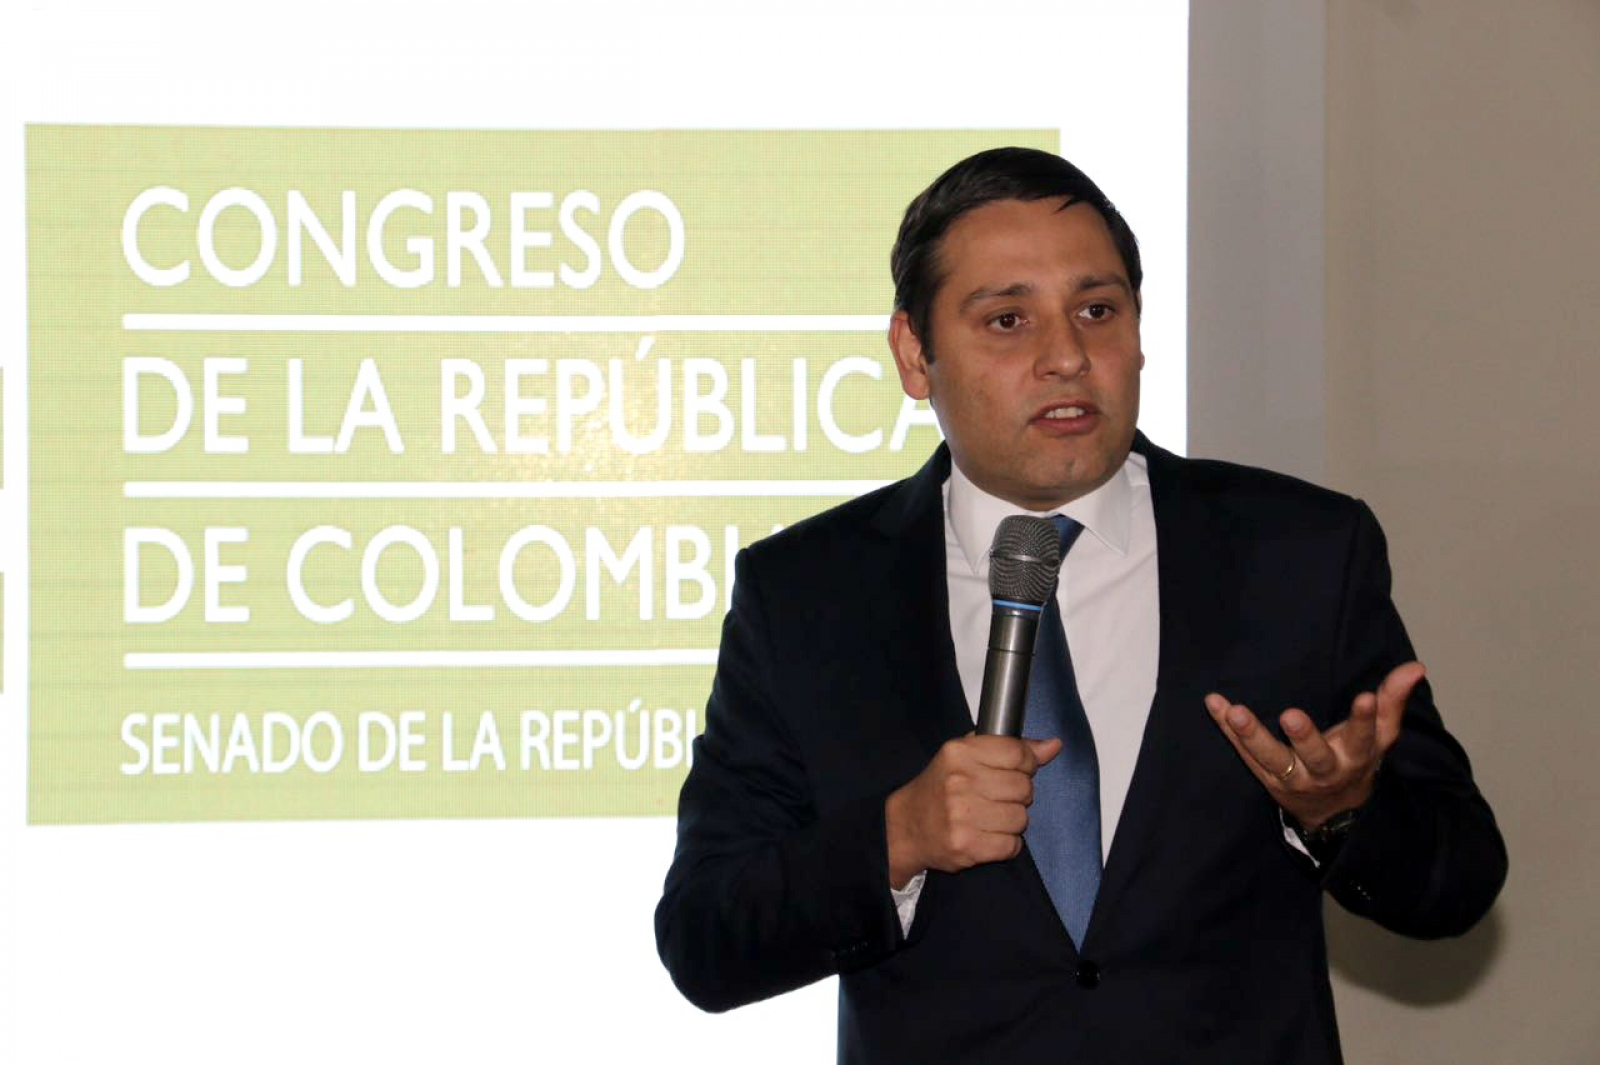 New Smartphone App to Give Colombian Citizens Unprecedented Access to Legislative Information